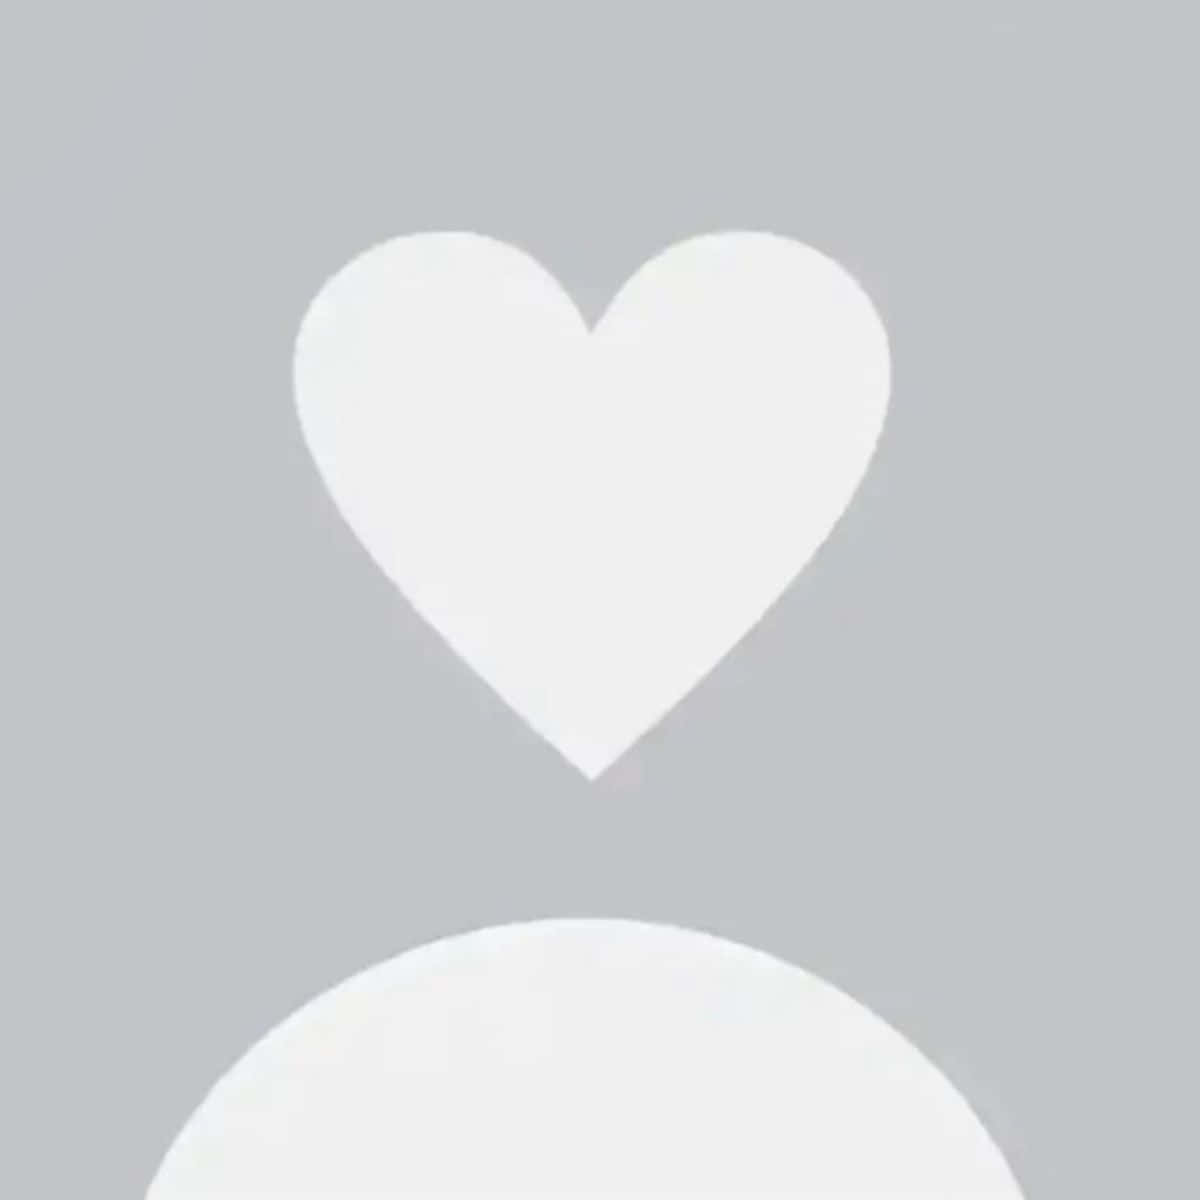 A White Heart With A Circle In The Middle